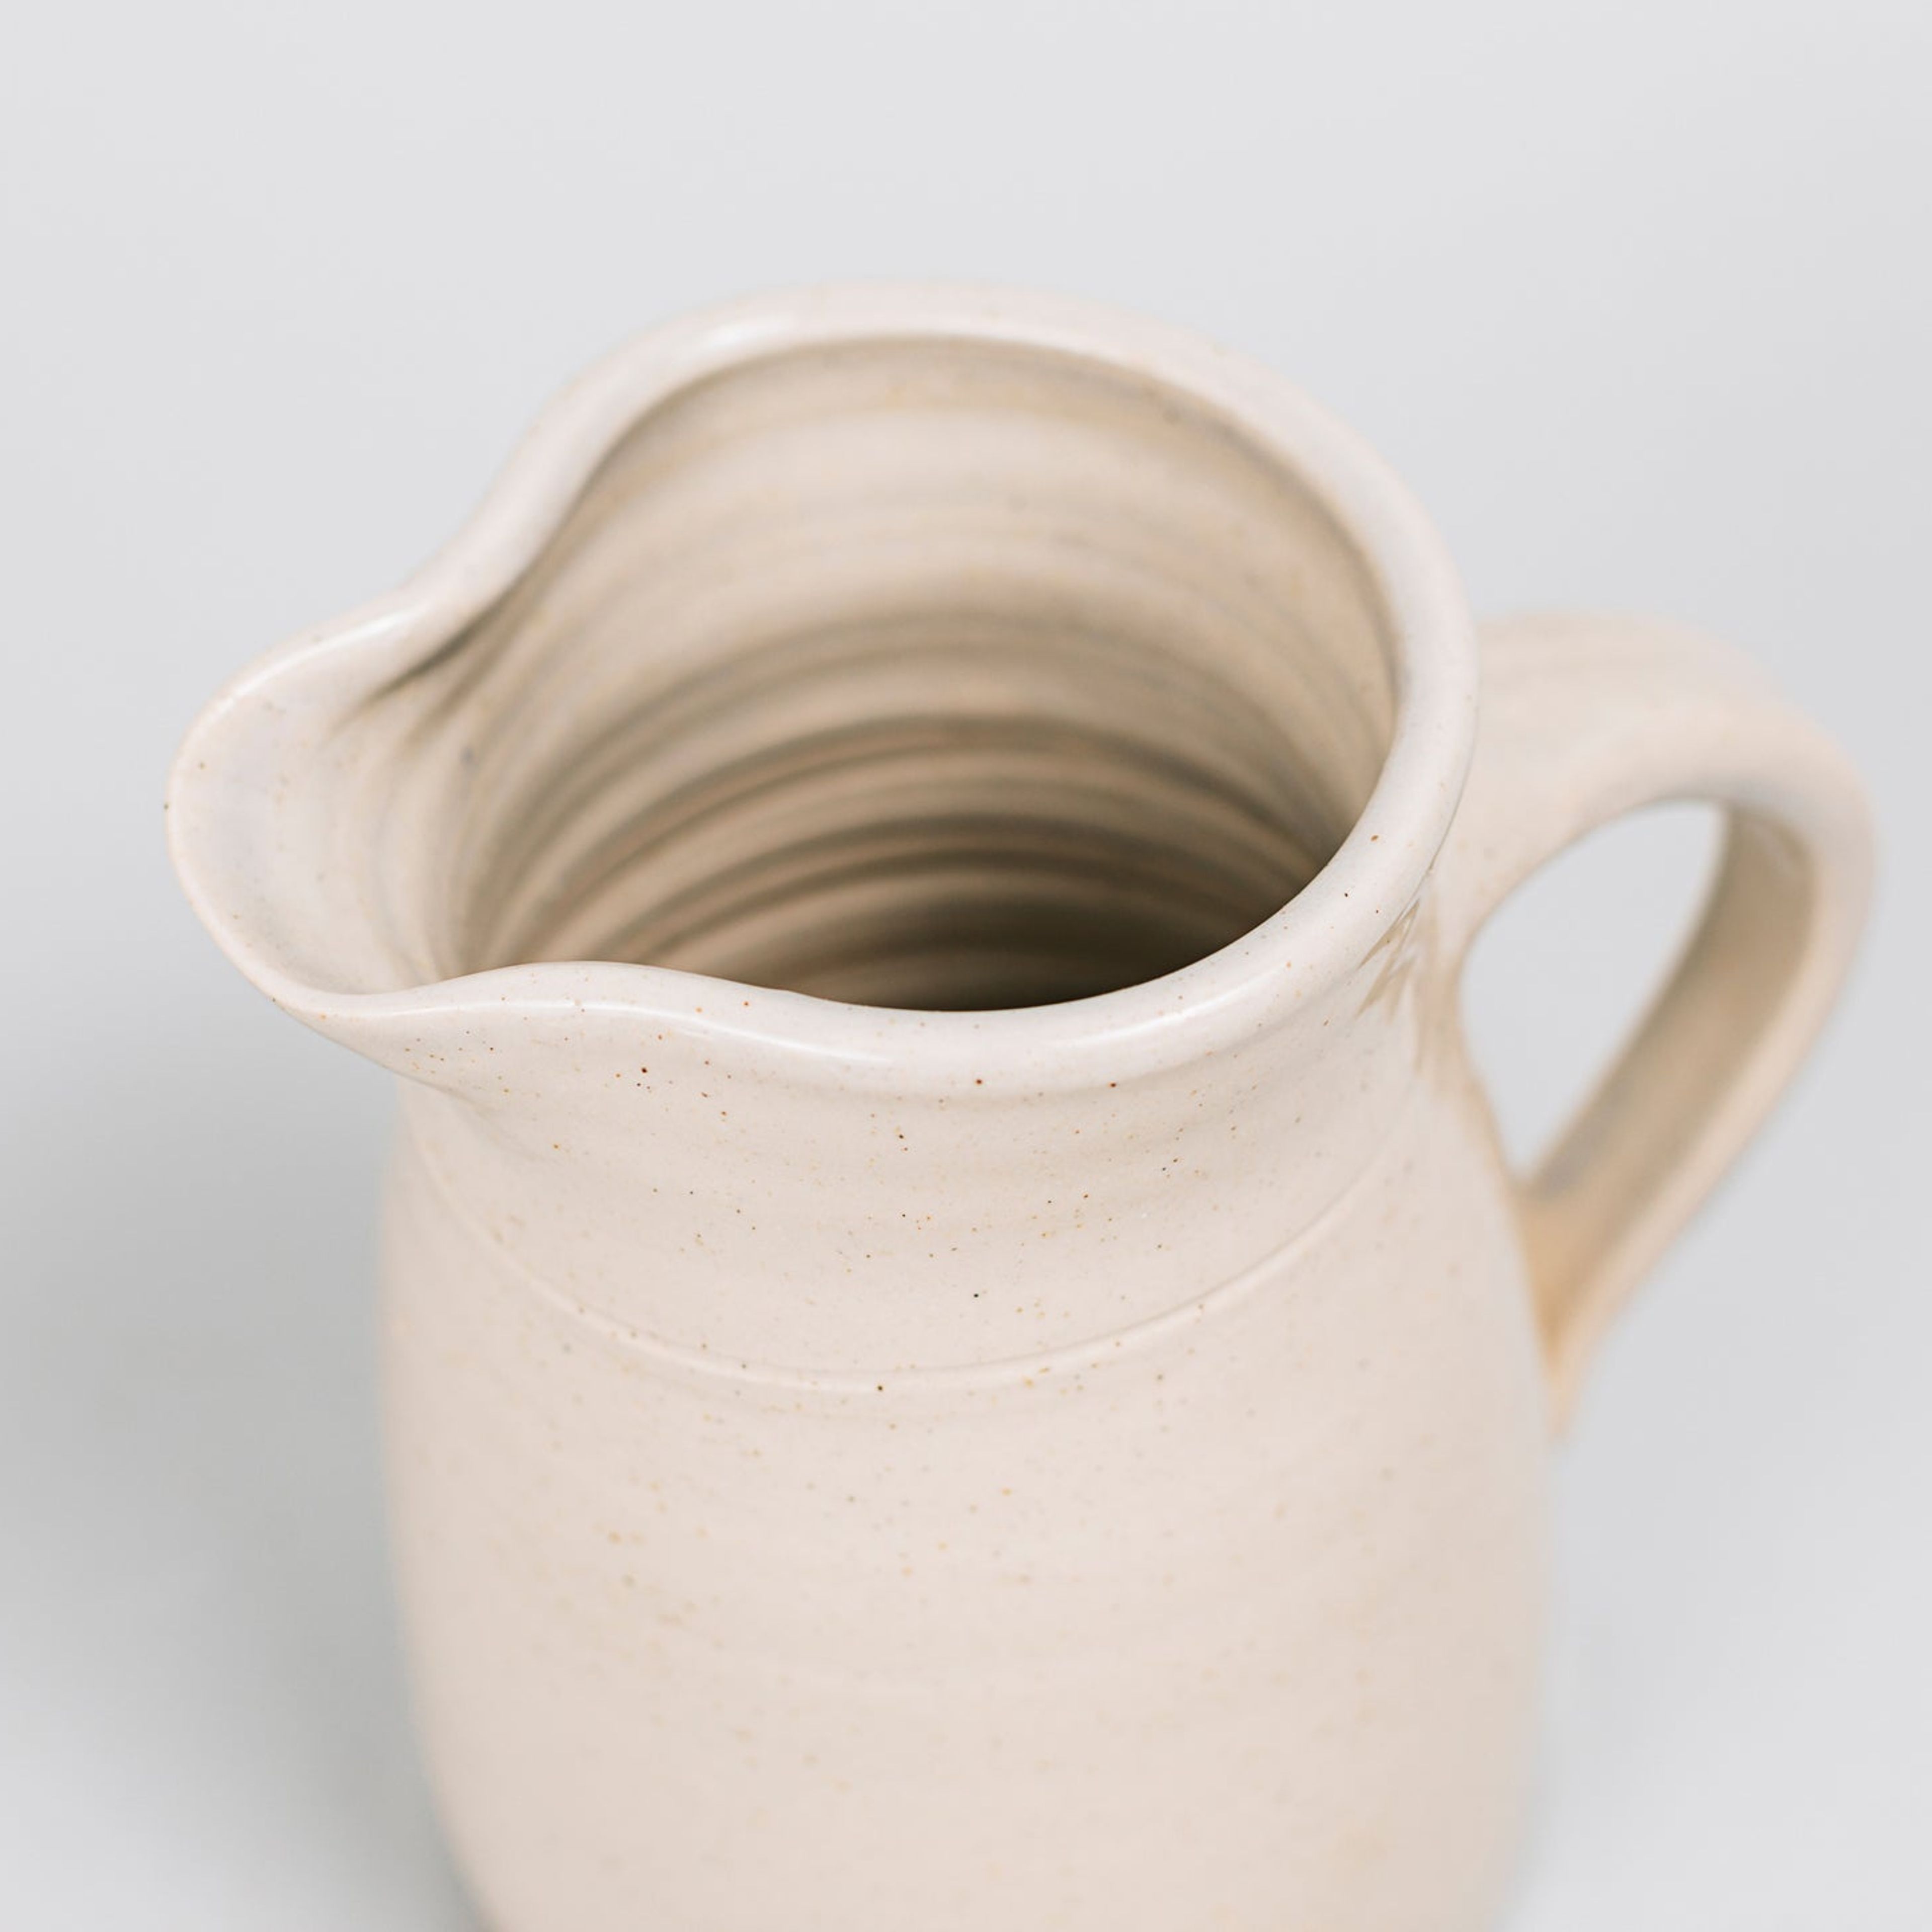 The Hand-Thrown Pitcher